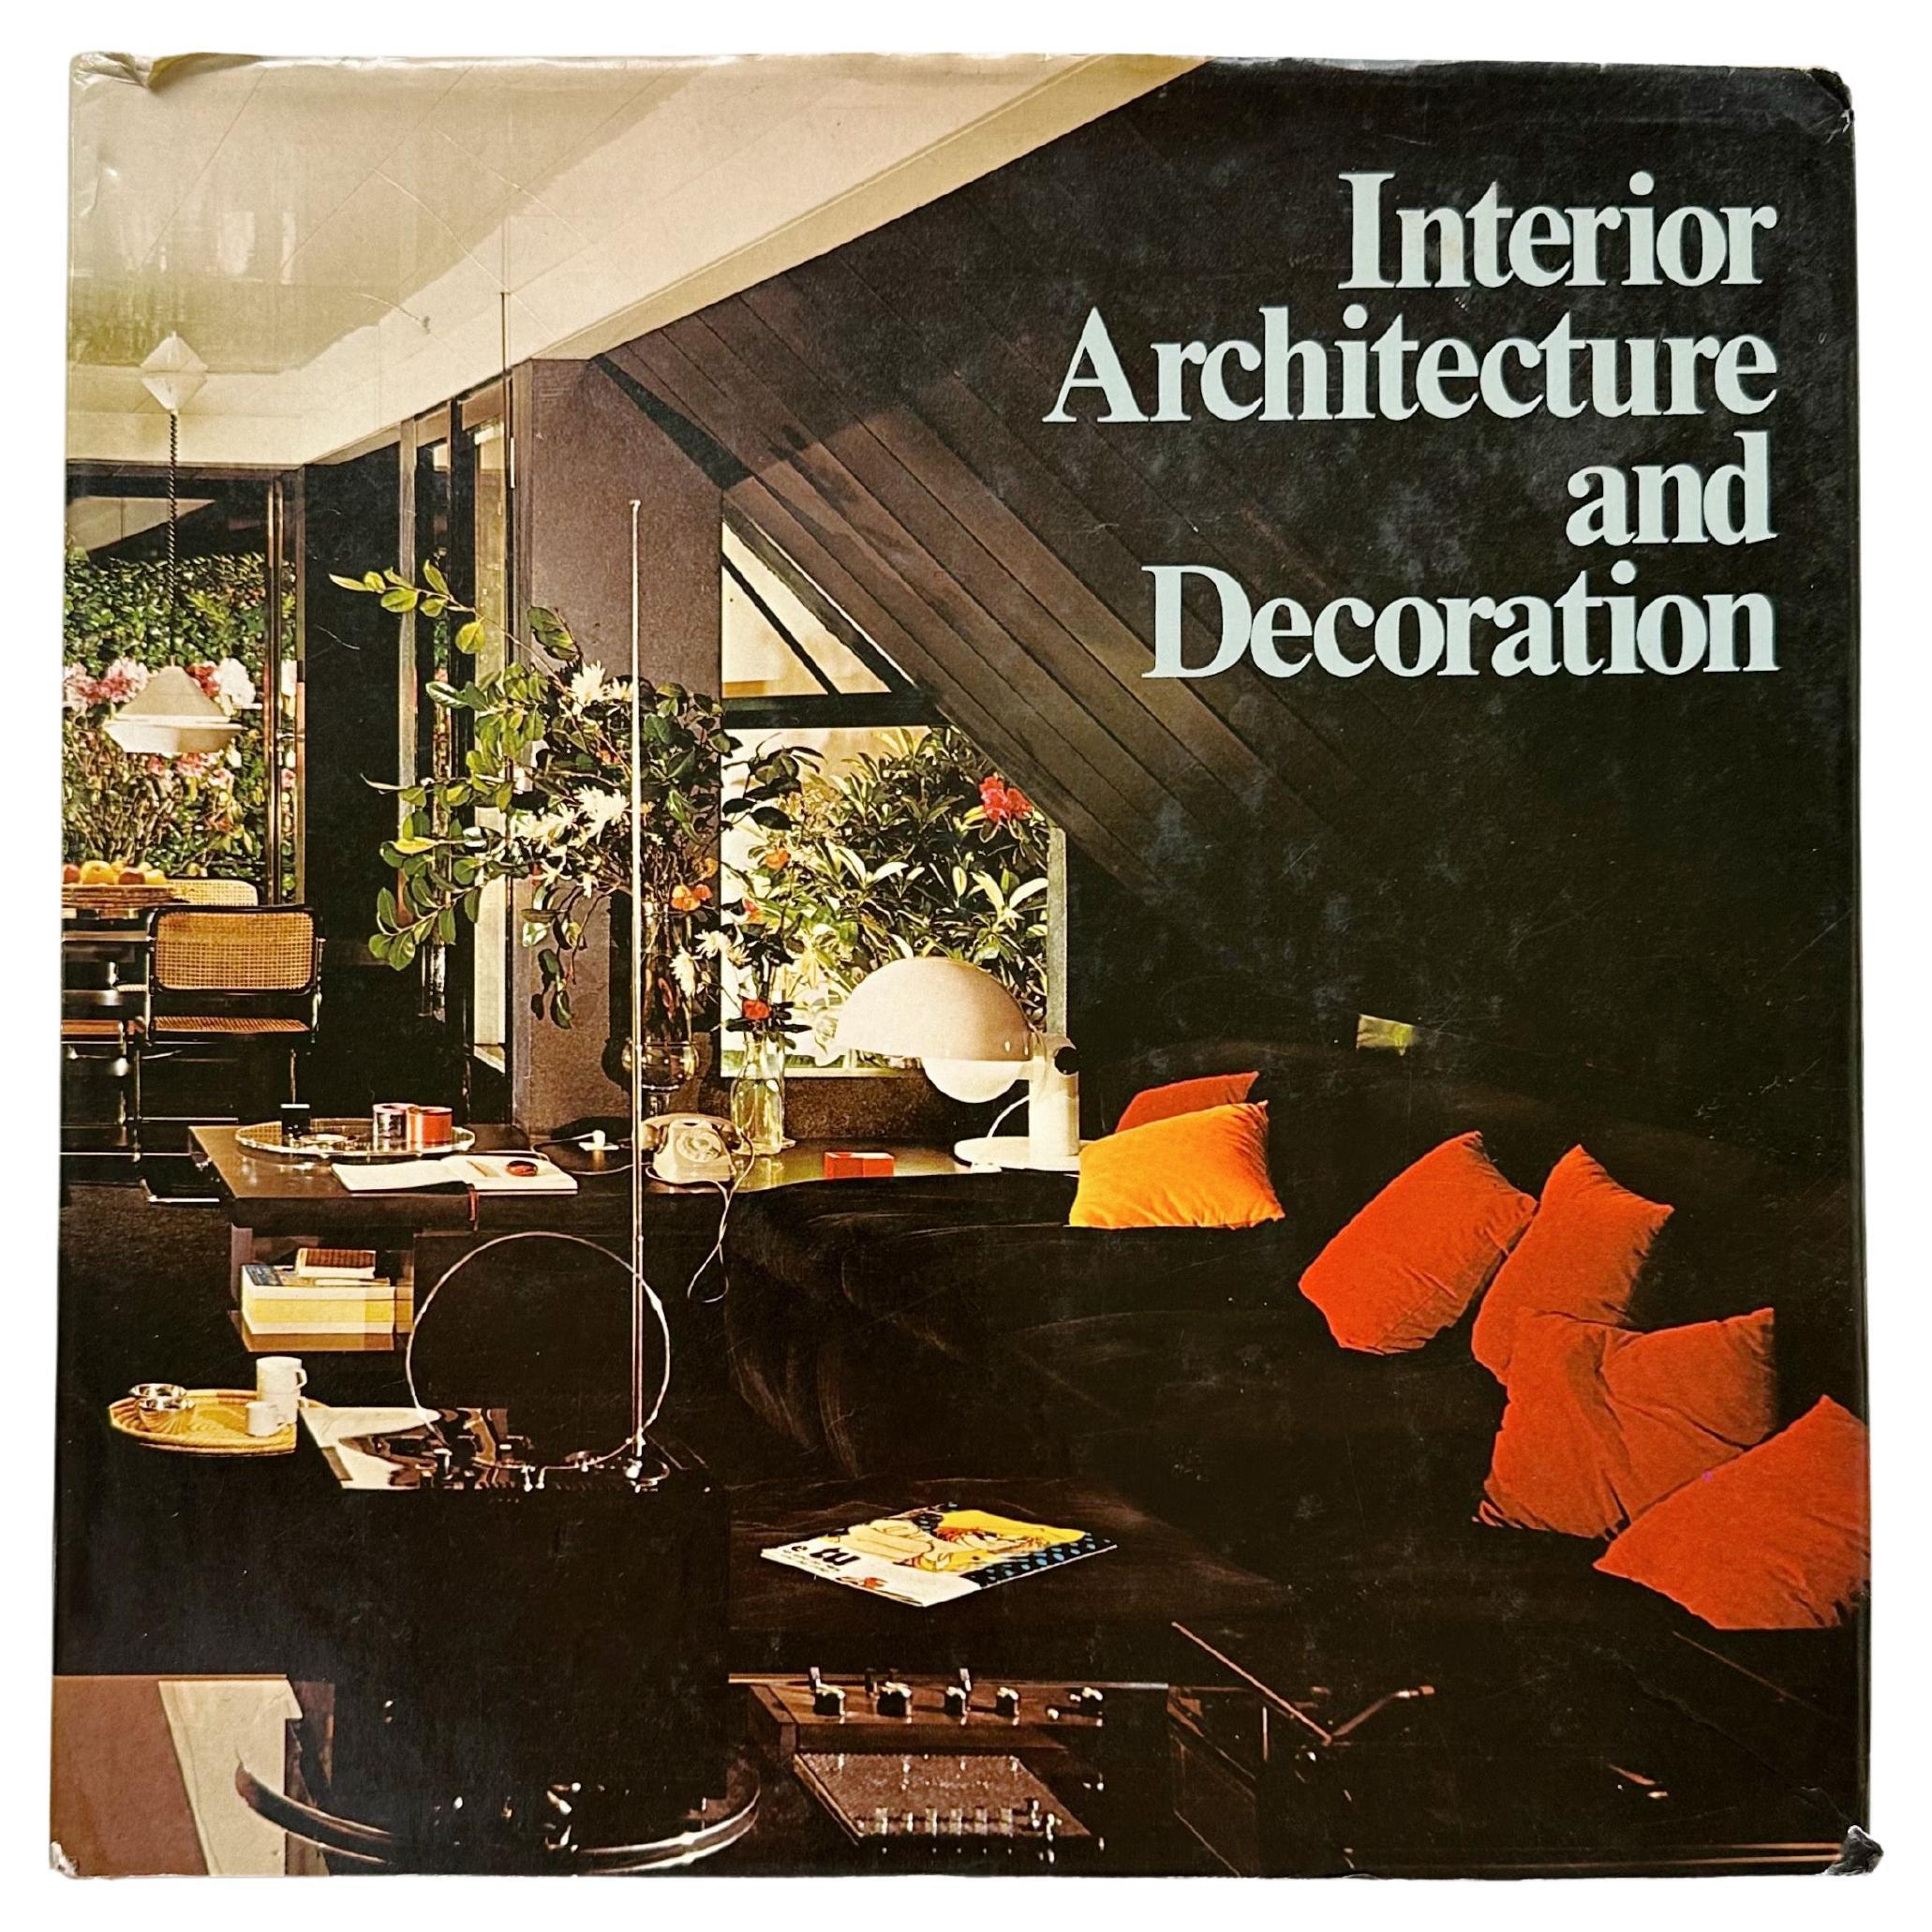 Interior Architecture and Decoration, Demachy, 1974